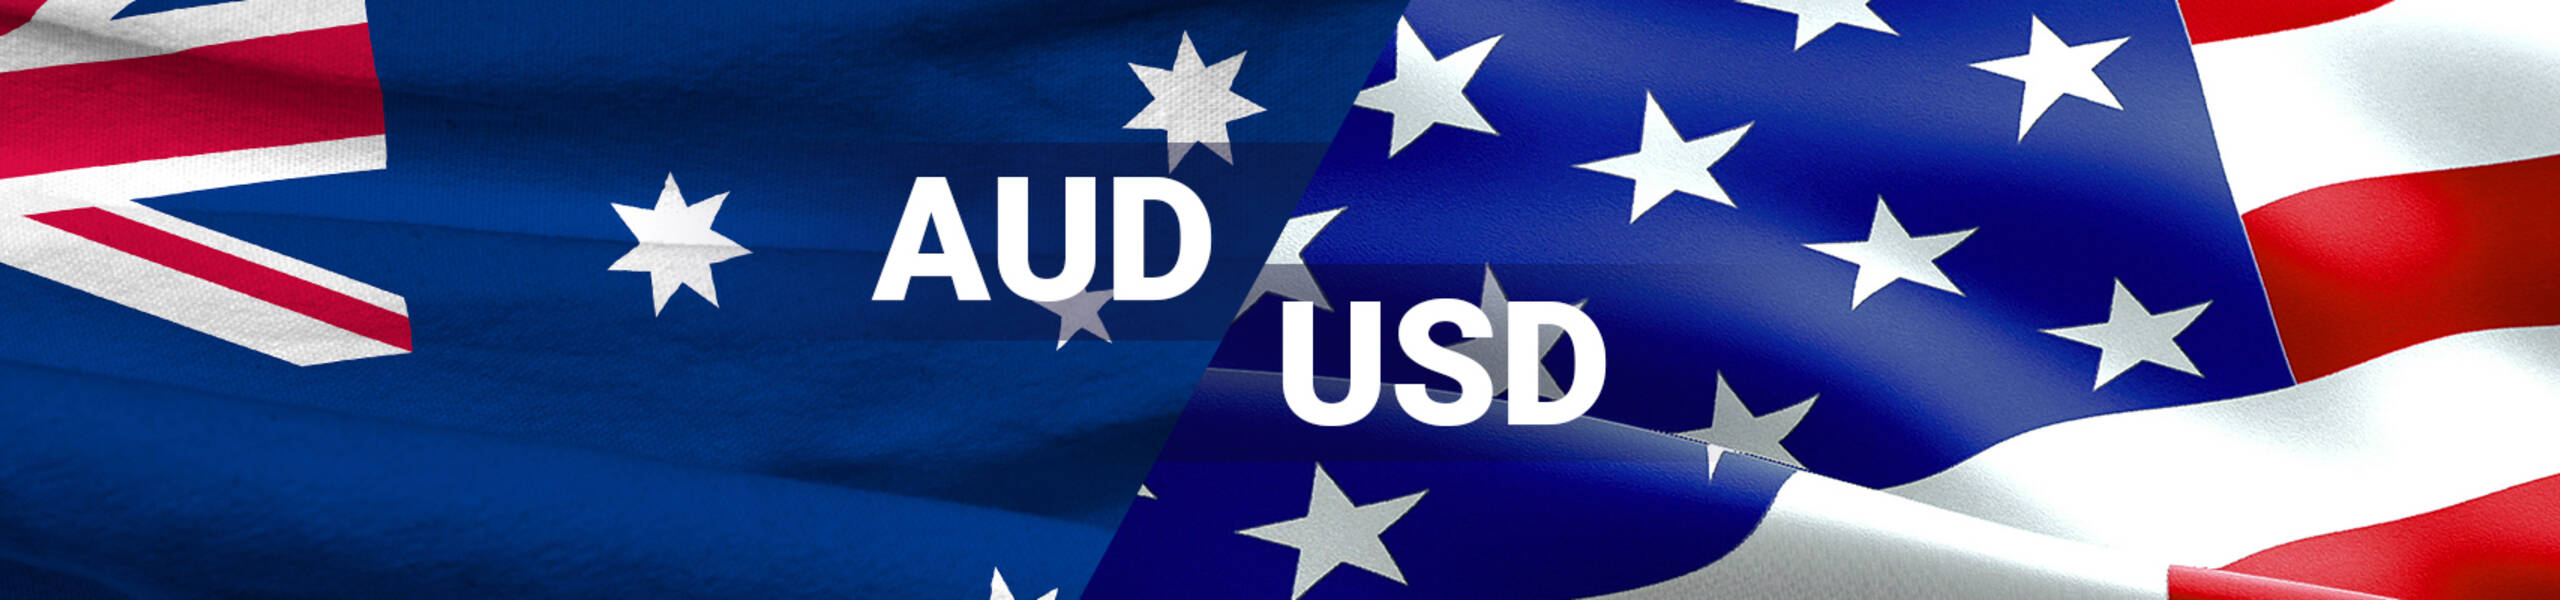 AUD/USD: market is oversold 